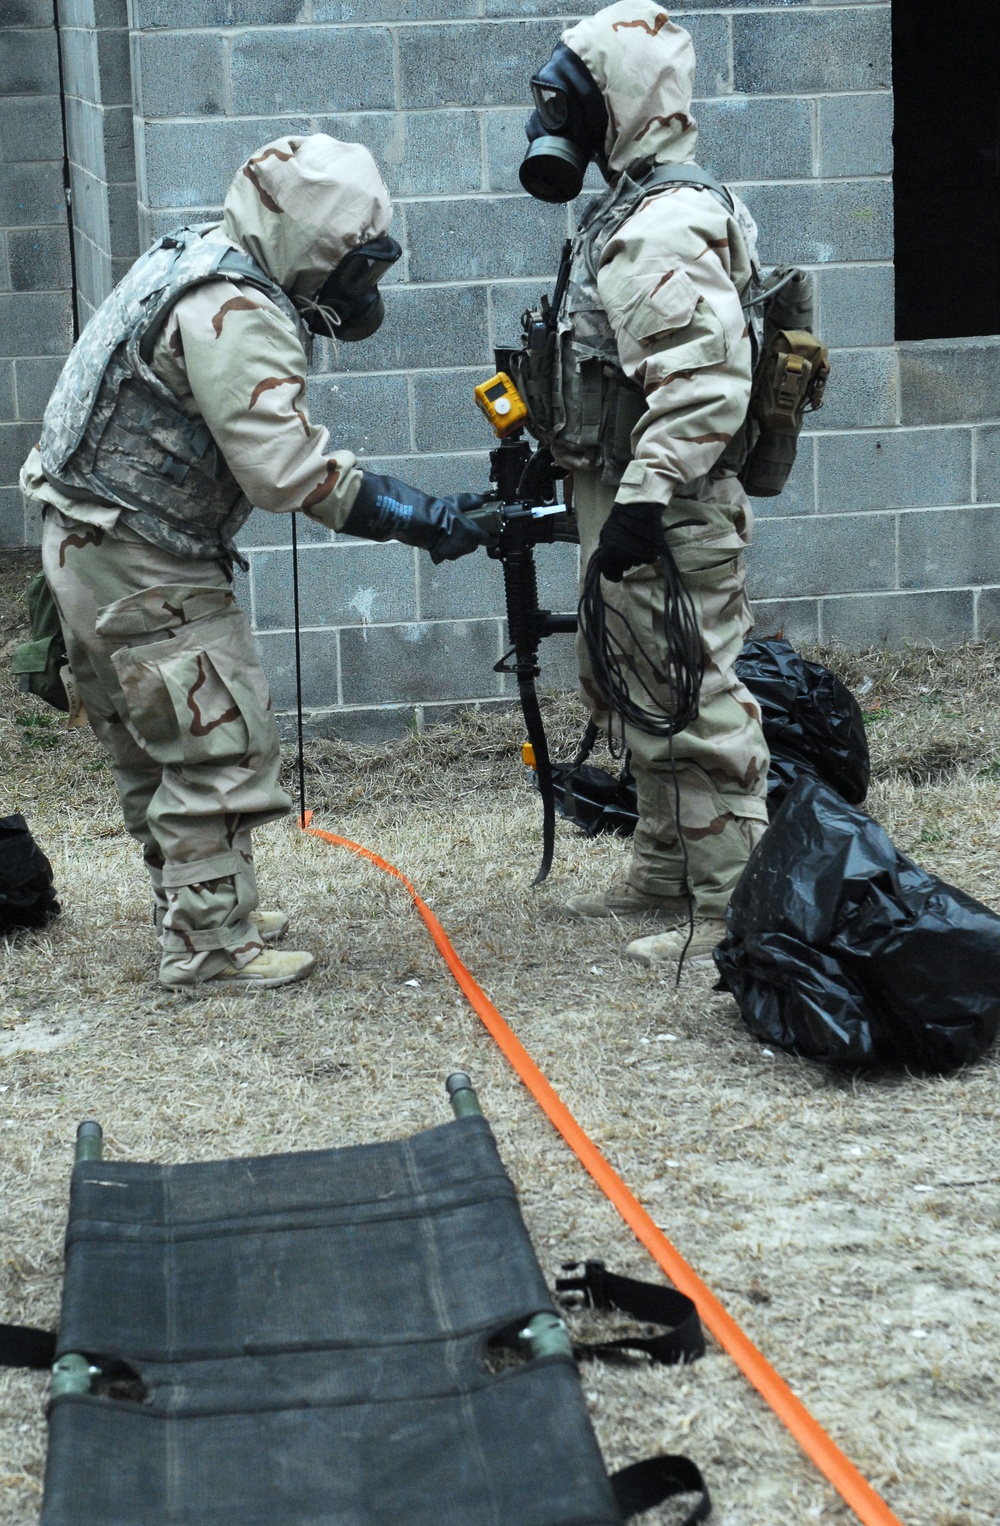 Paratroopers from 2-325 AIR, 2nd BCT 82nd ABN DIV conduct clearing training